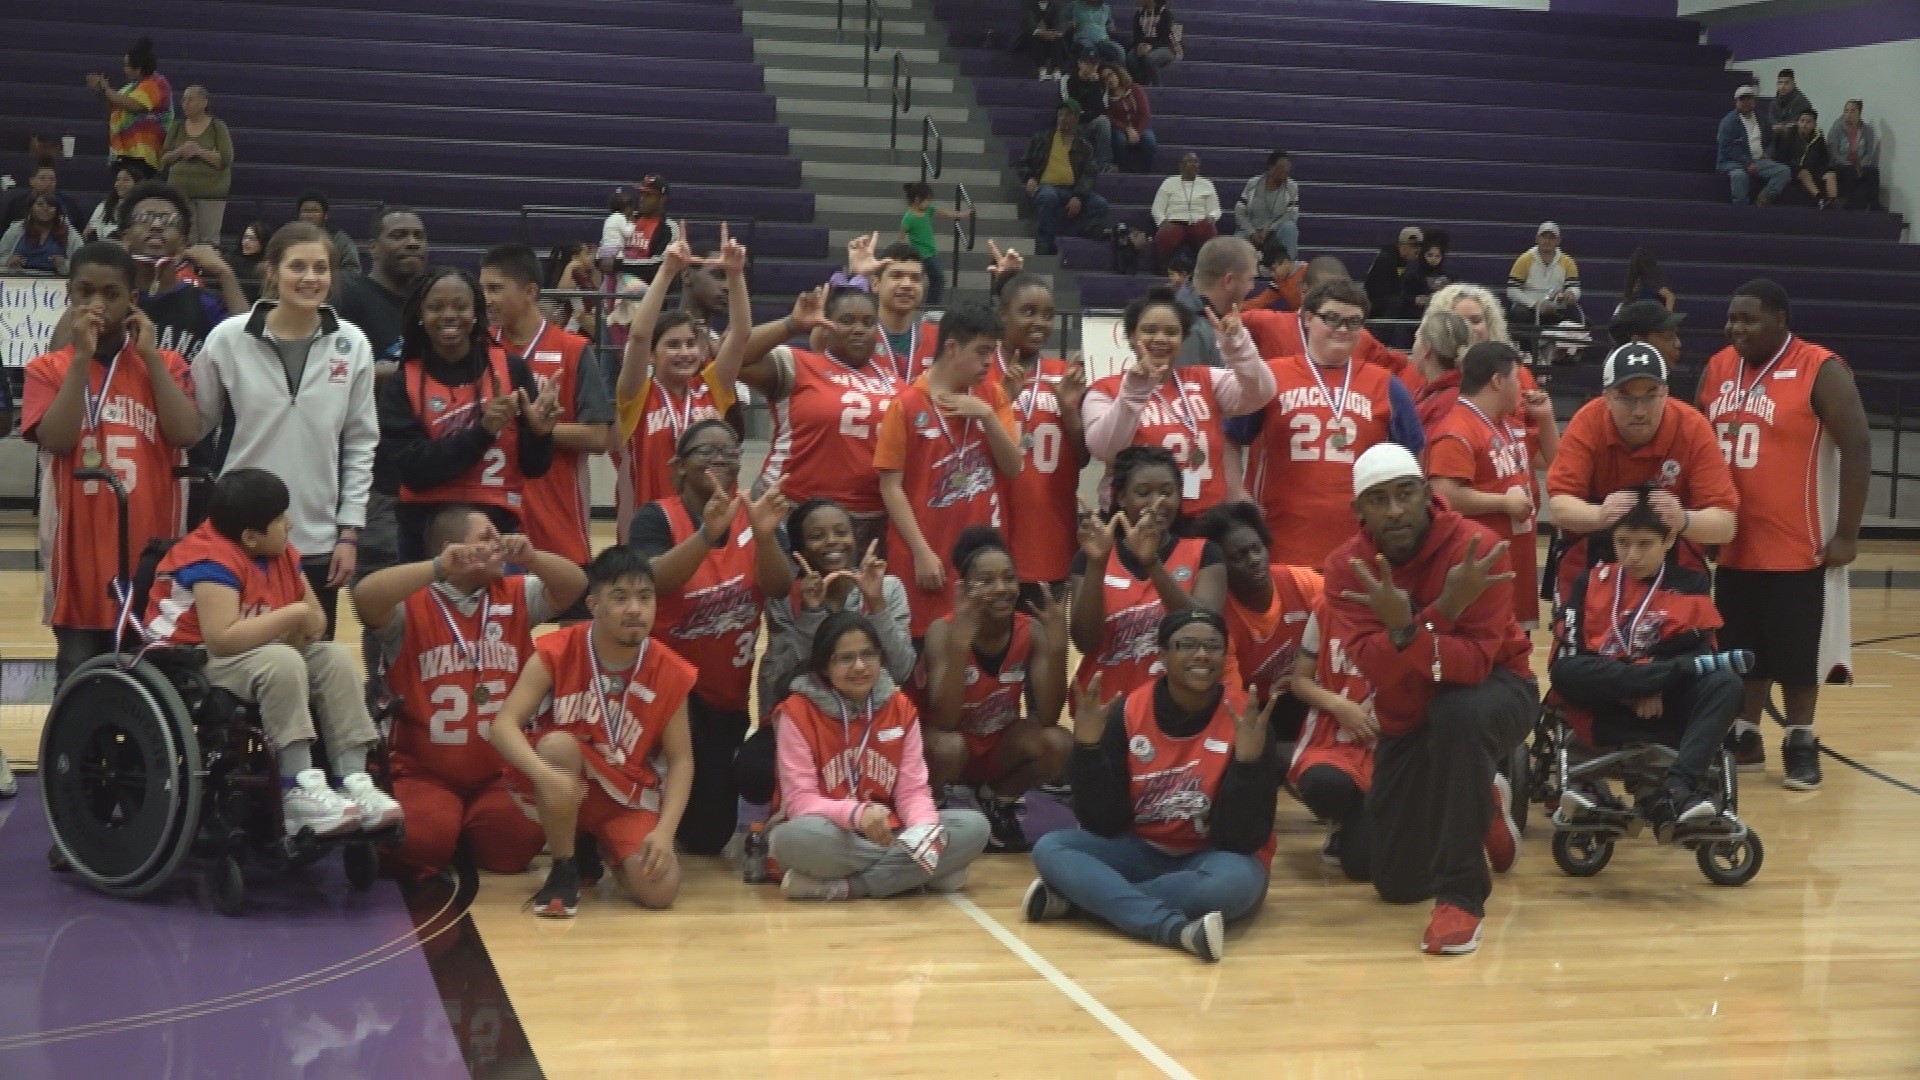 Student-athletes with disabilities played a game of hoops with the community cheering for their success.